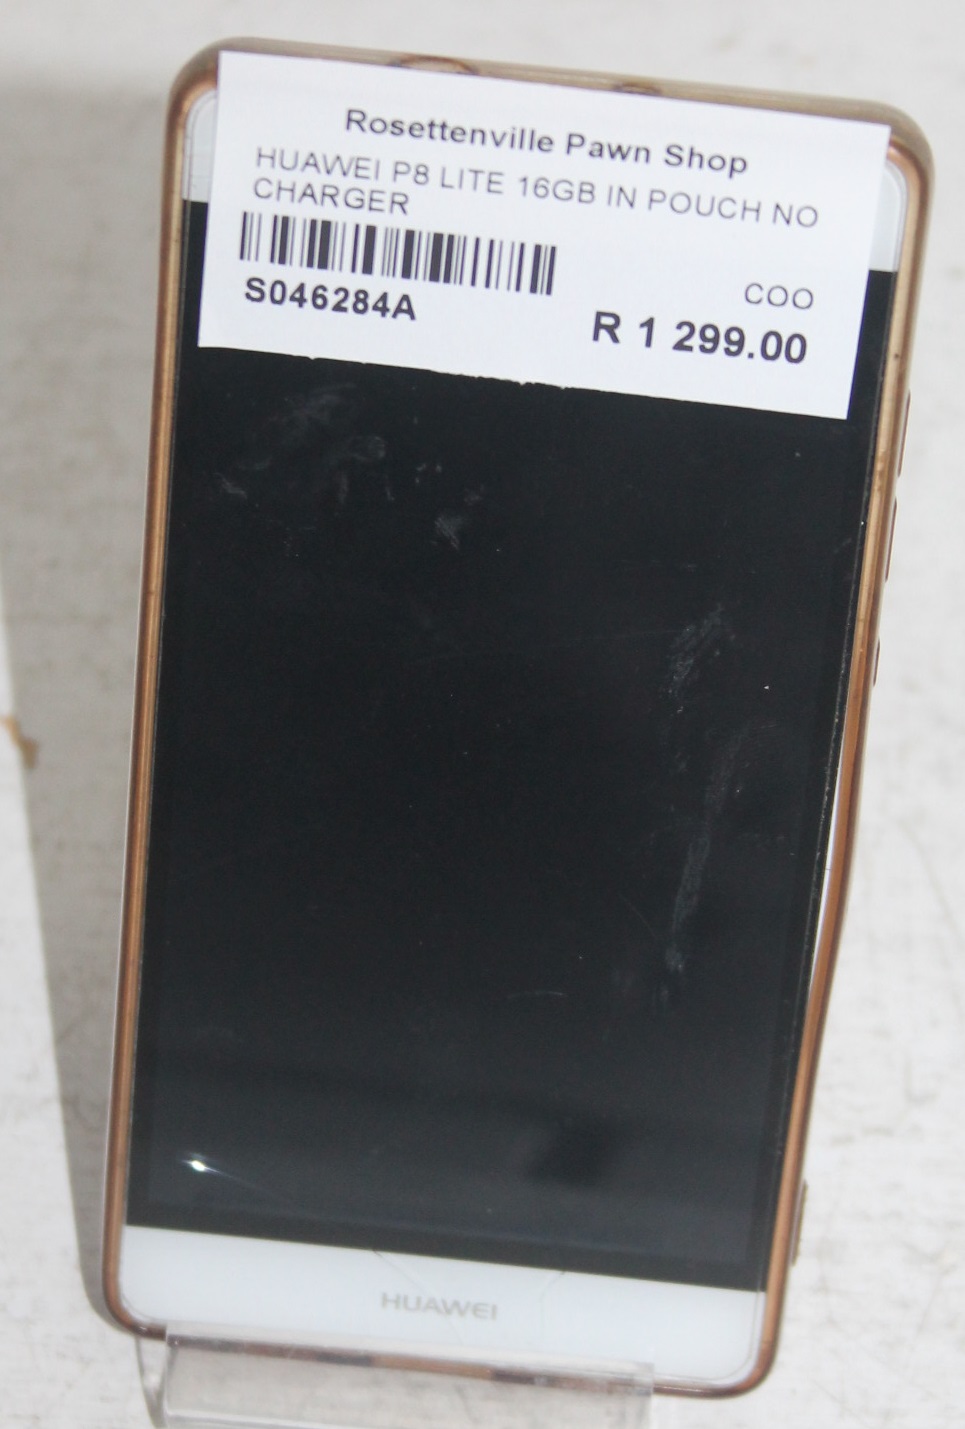 Huawei p8 lite 16gb with pouch and charger S046284A #Rosettenvillepawnshop